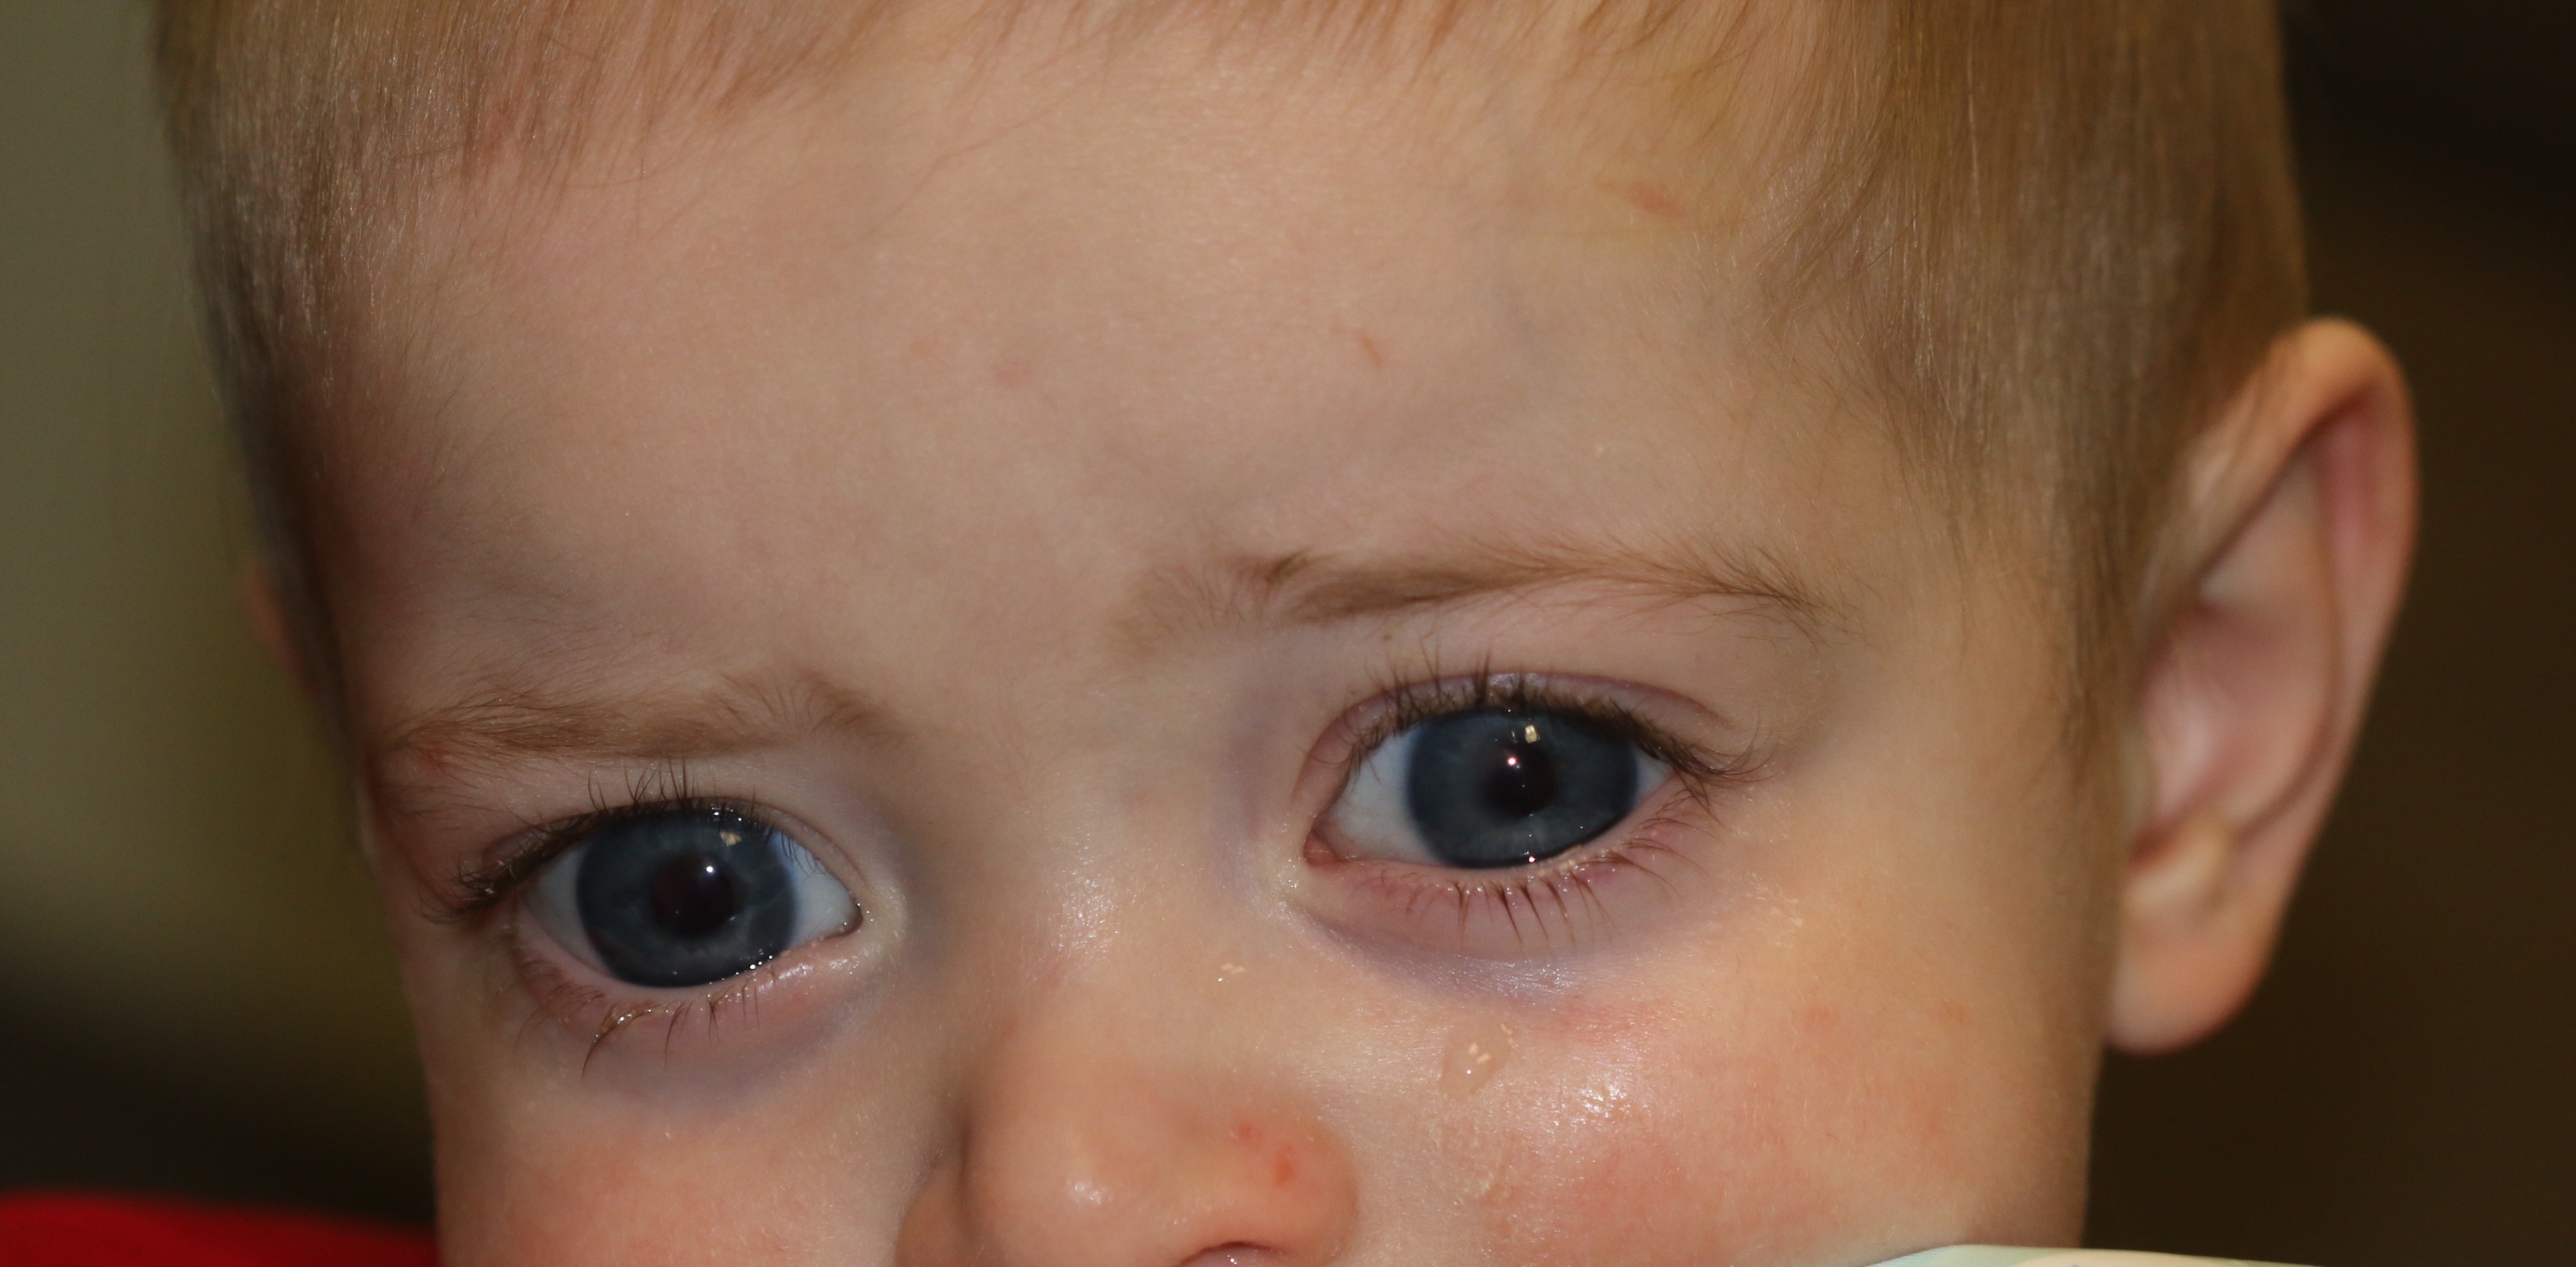 Buphthalmos in a 9-month-old male who presents with bilateral tearing and light sensitivity. Bilateral enlargement of the globes is seen with enlargement of the corneas with tears in the Descemet's membrane ind inferior corneal edema. The sclera shows a bluish appearance because of thinning of the sclera and the uveal tissue showing through. Thecorneal diameter is 13 mm (normal is 10.5 mm in a child this age). The intraocular pressure is 35 mm Hg in the right eye and 38 mm Hg in the left.